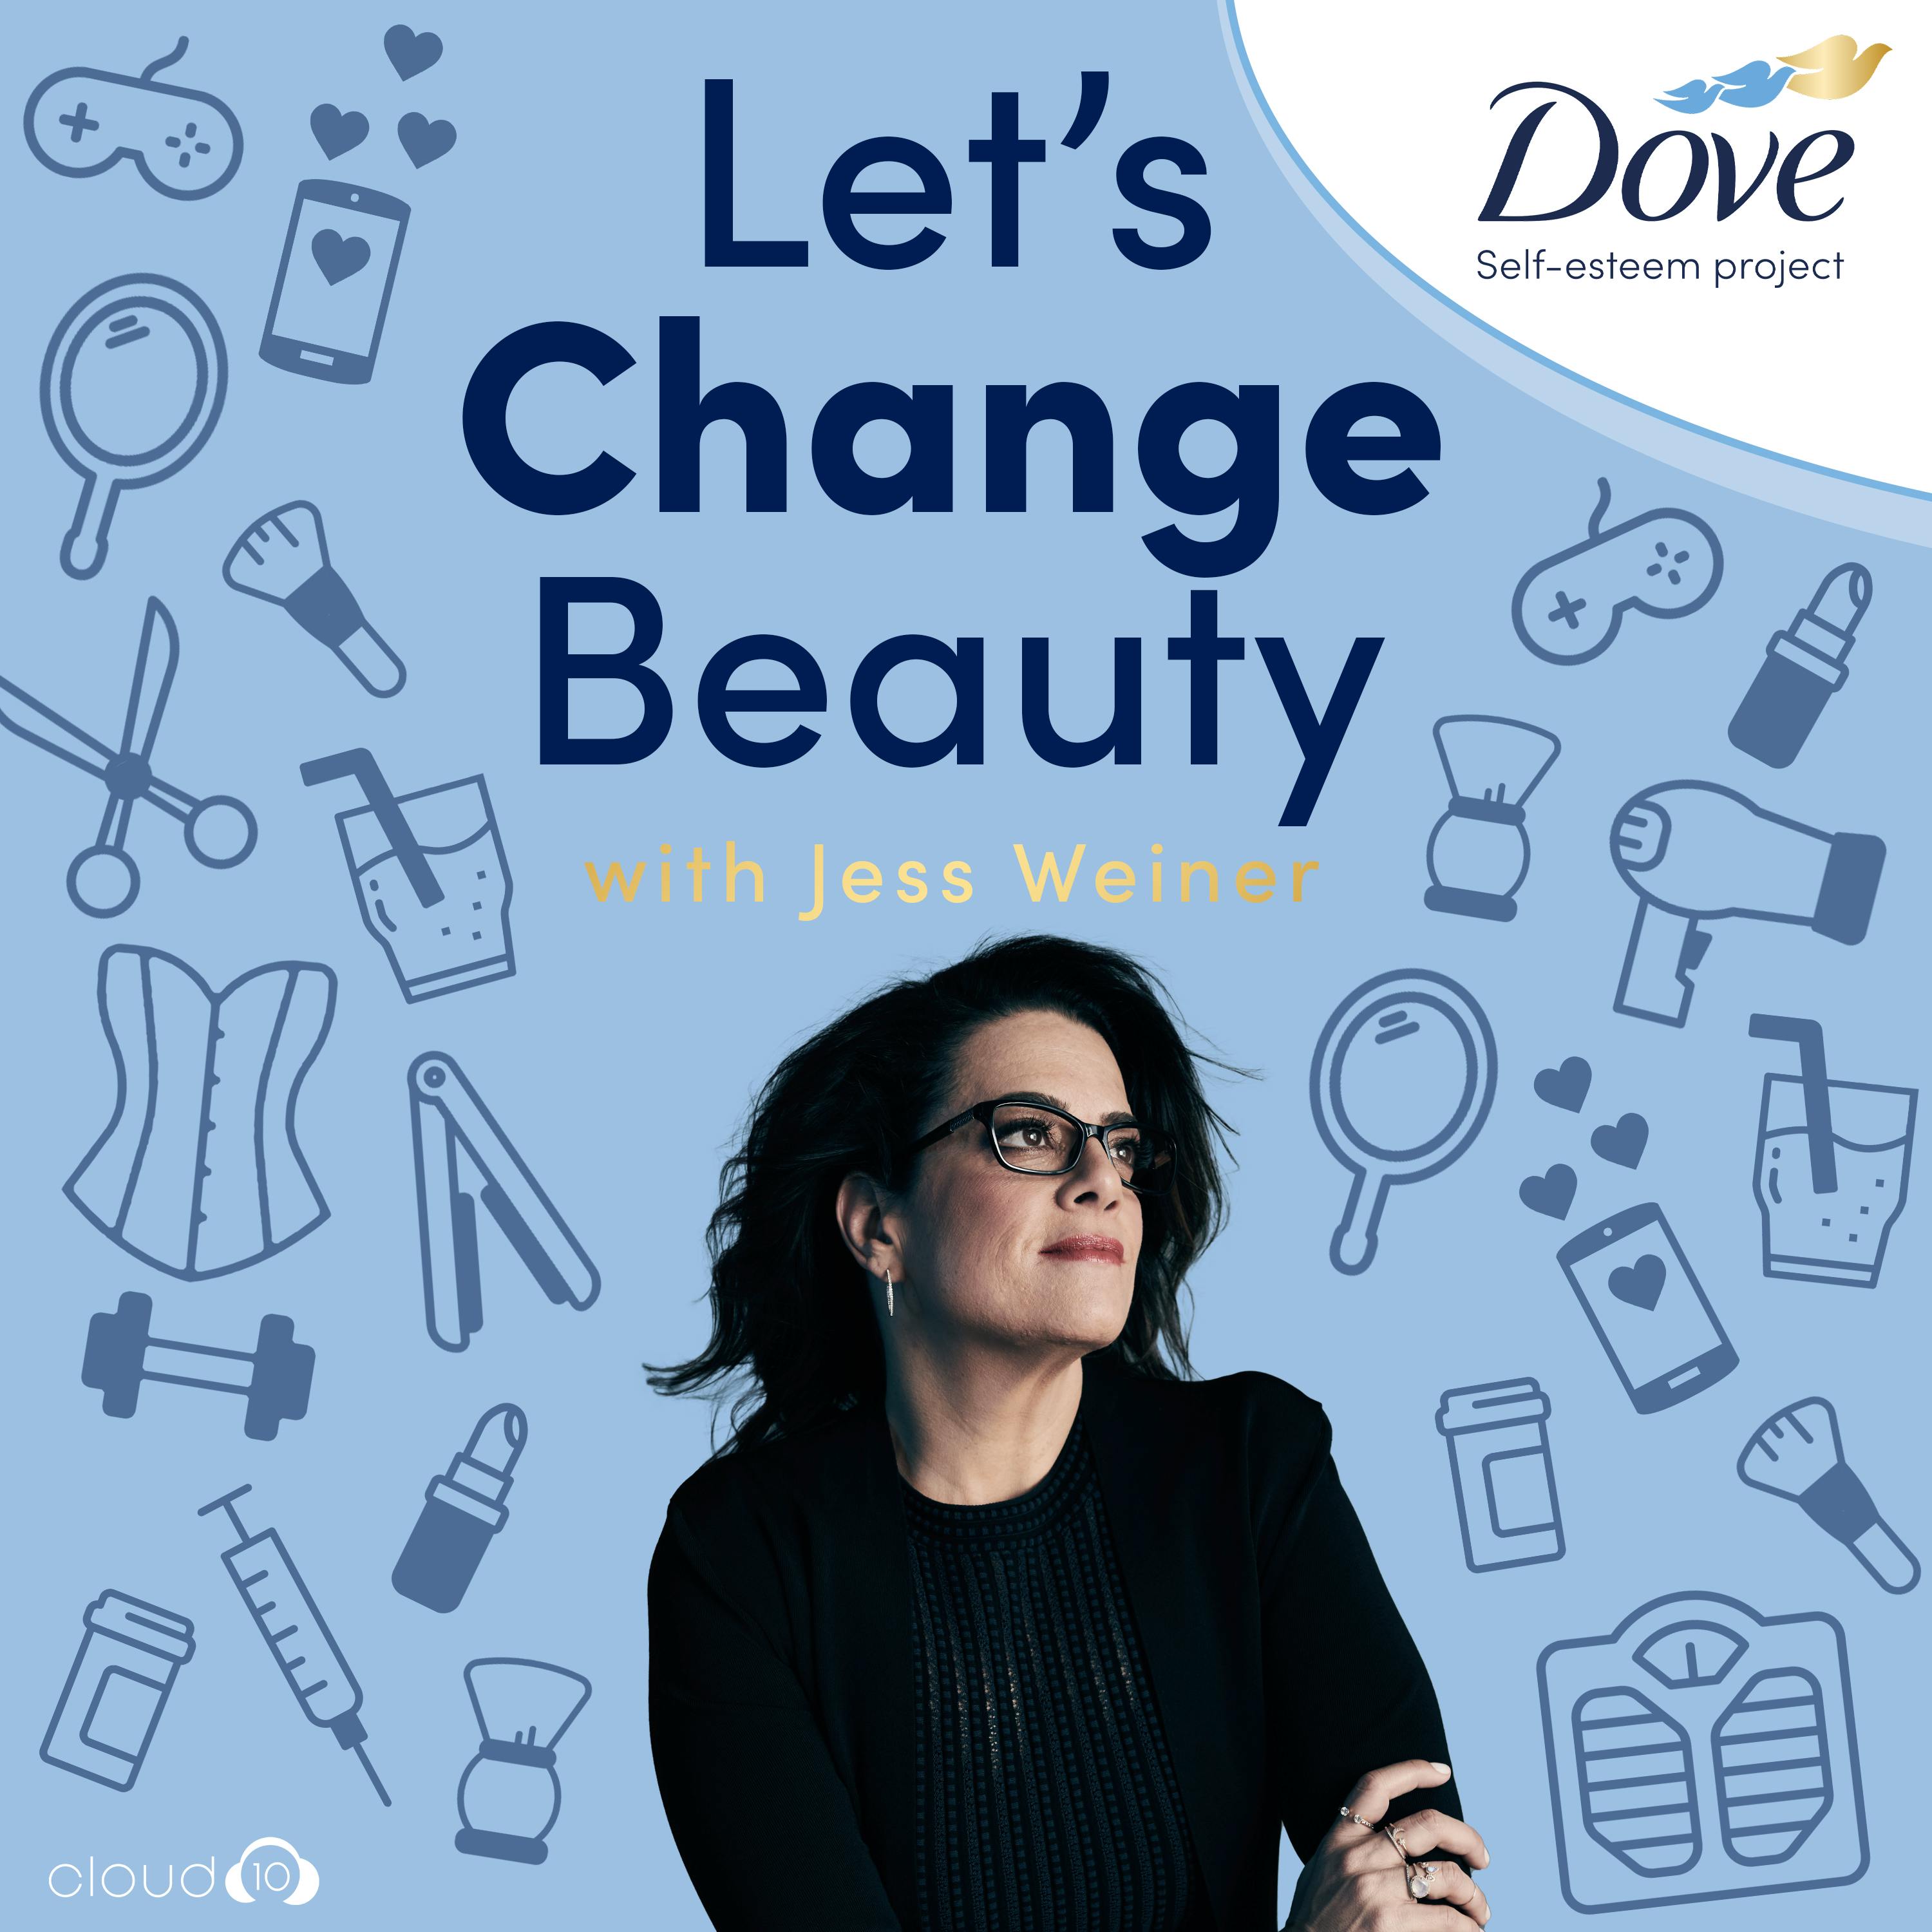 Introducing: Let’s Change Beauty with Jess Weiner